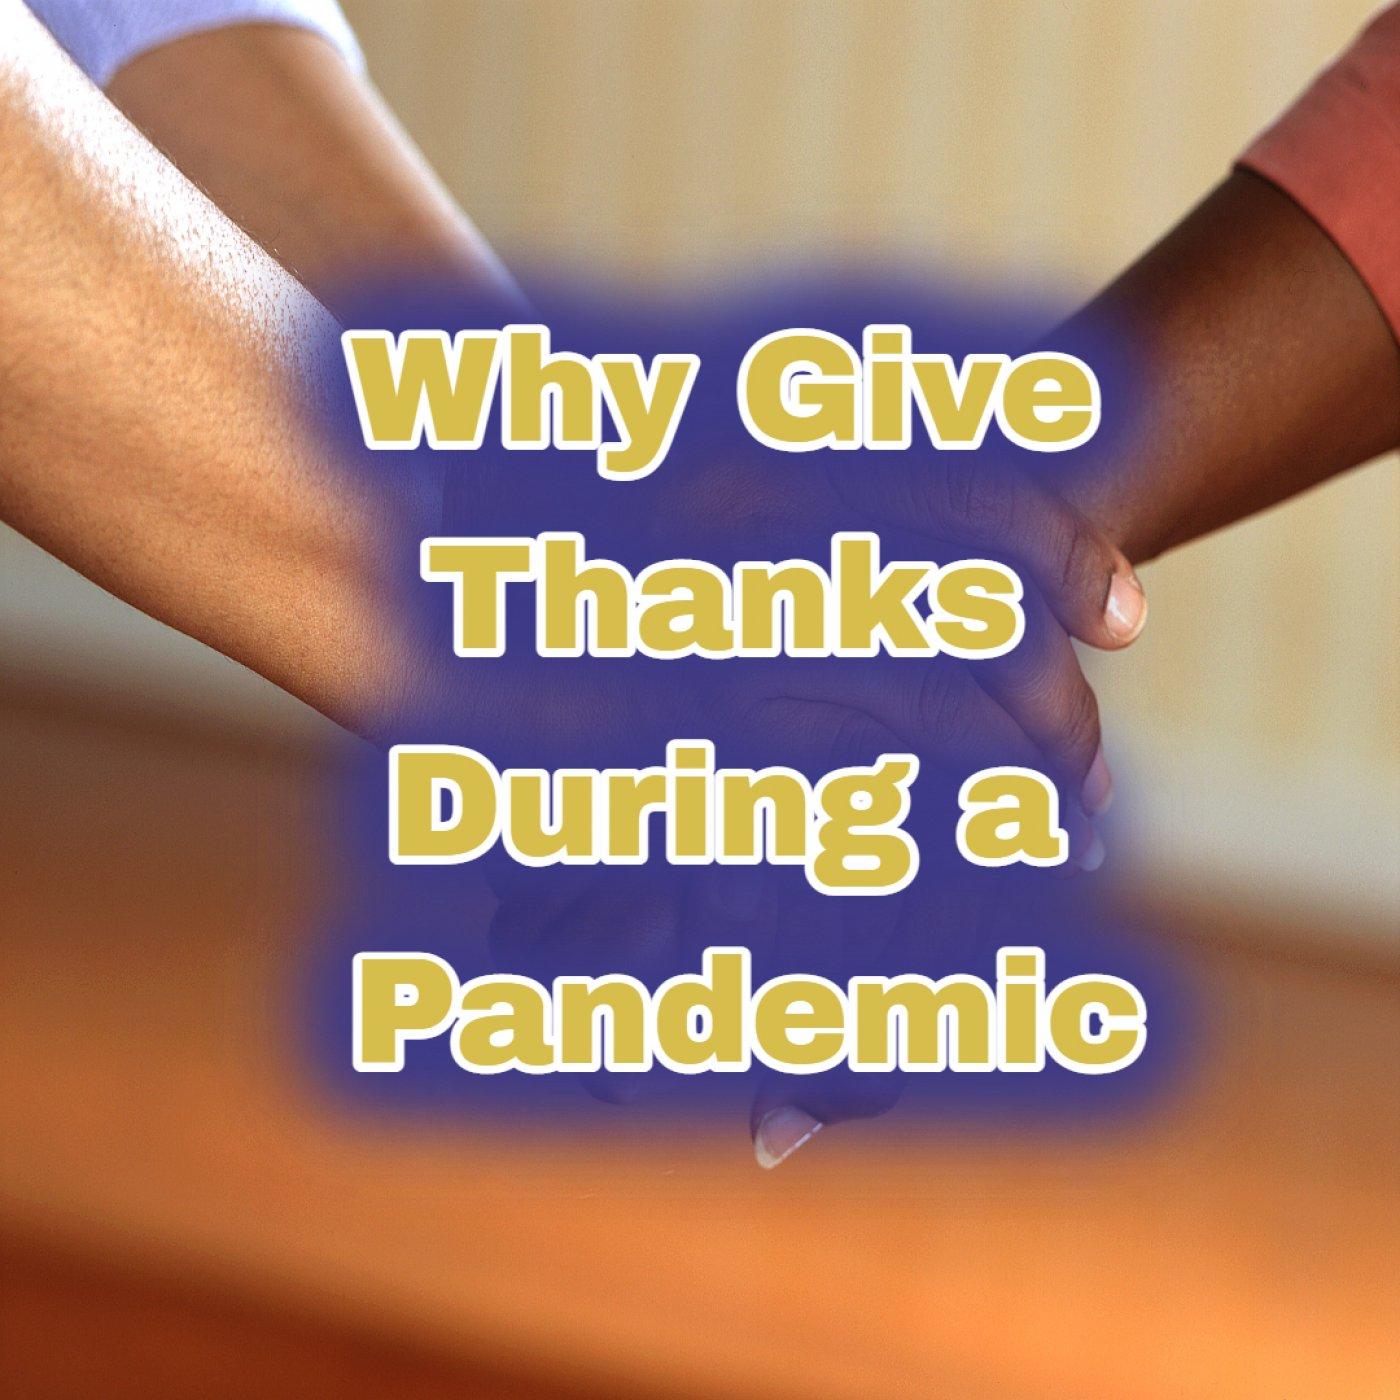 Thumbnail for "Why give thanks during a pandemic?".